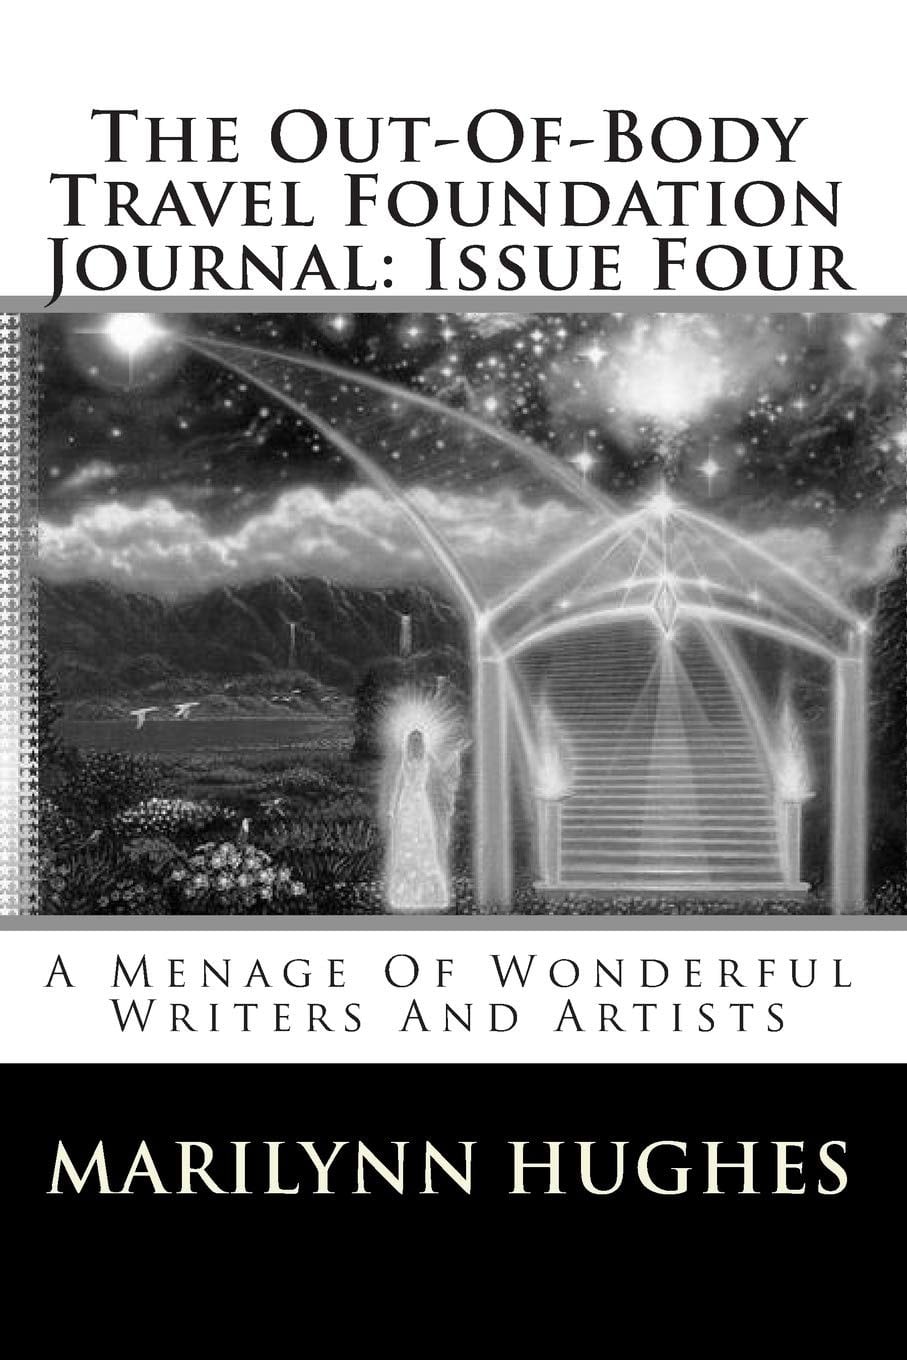 A Menage of Wonderful Writers and Artists, By Marilynn Hughes